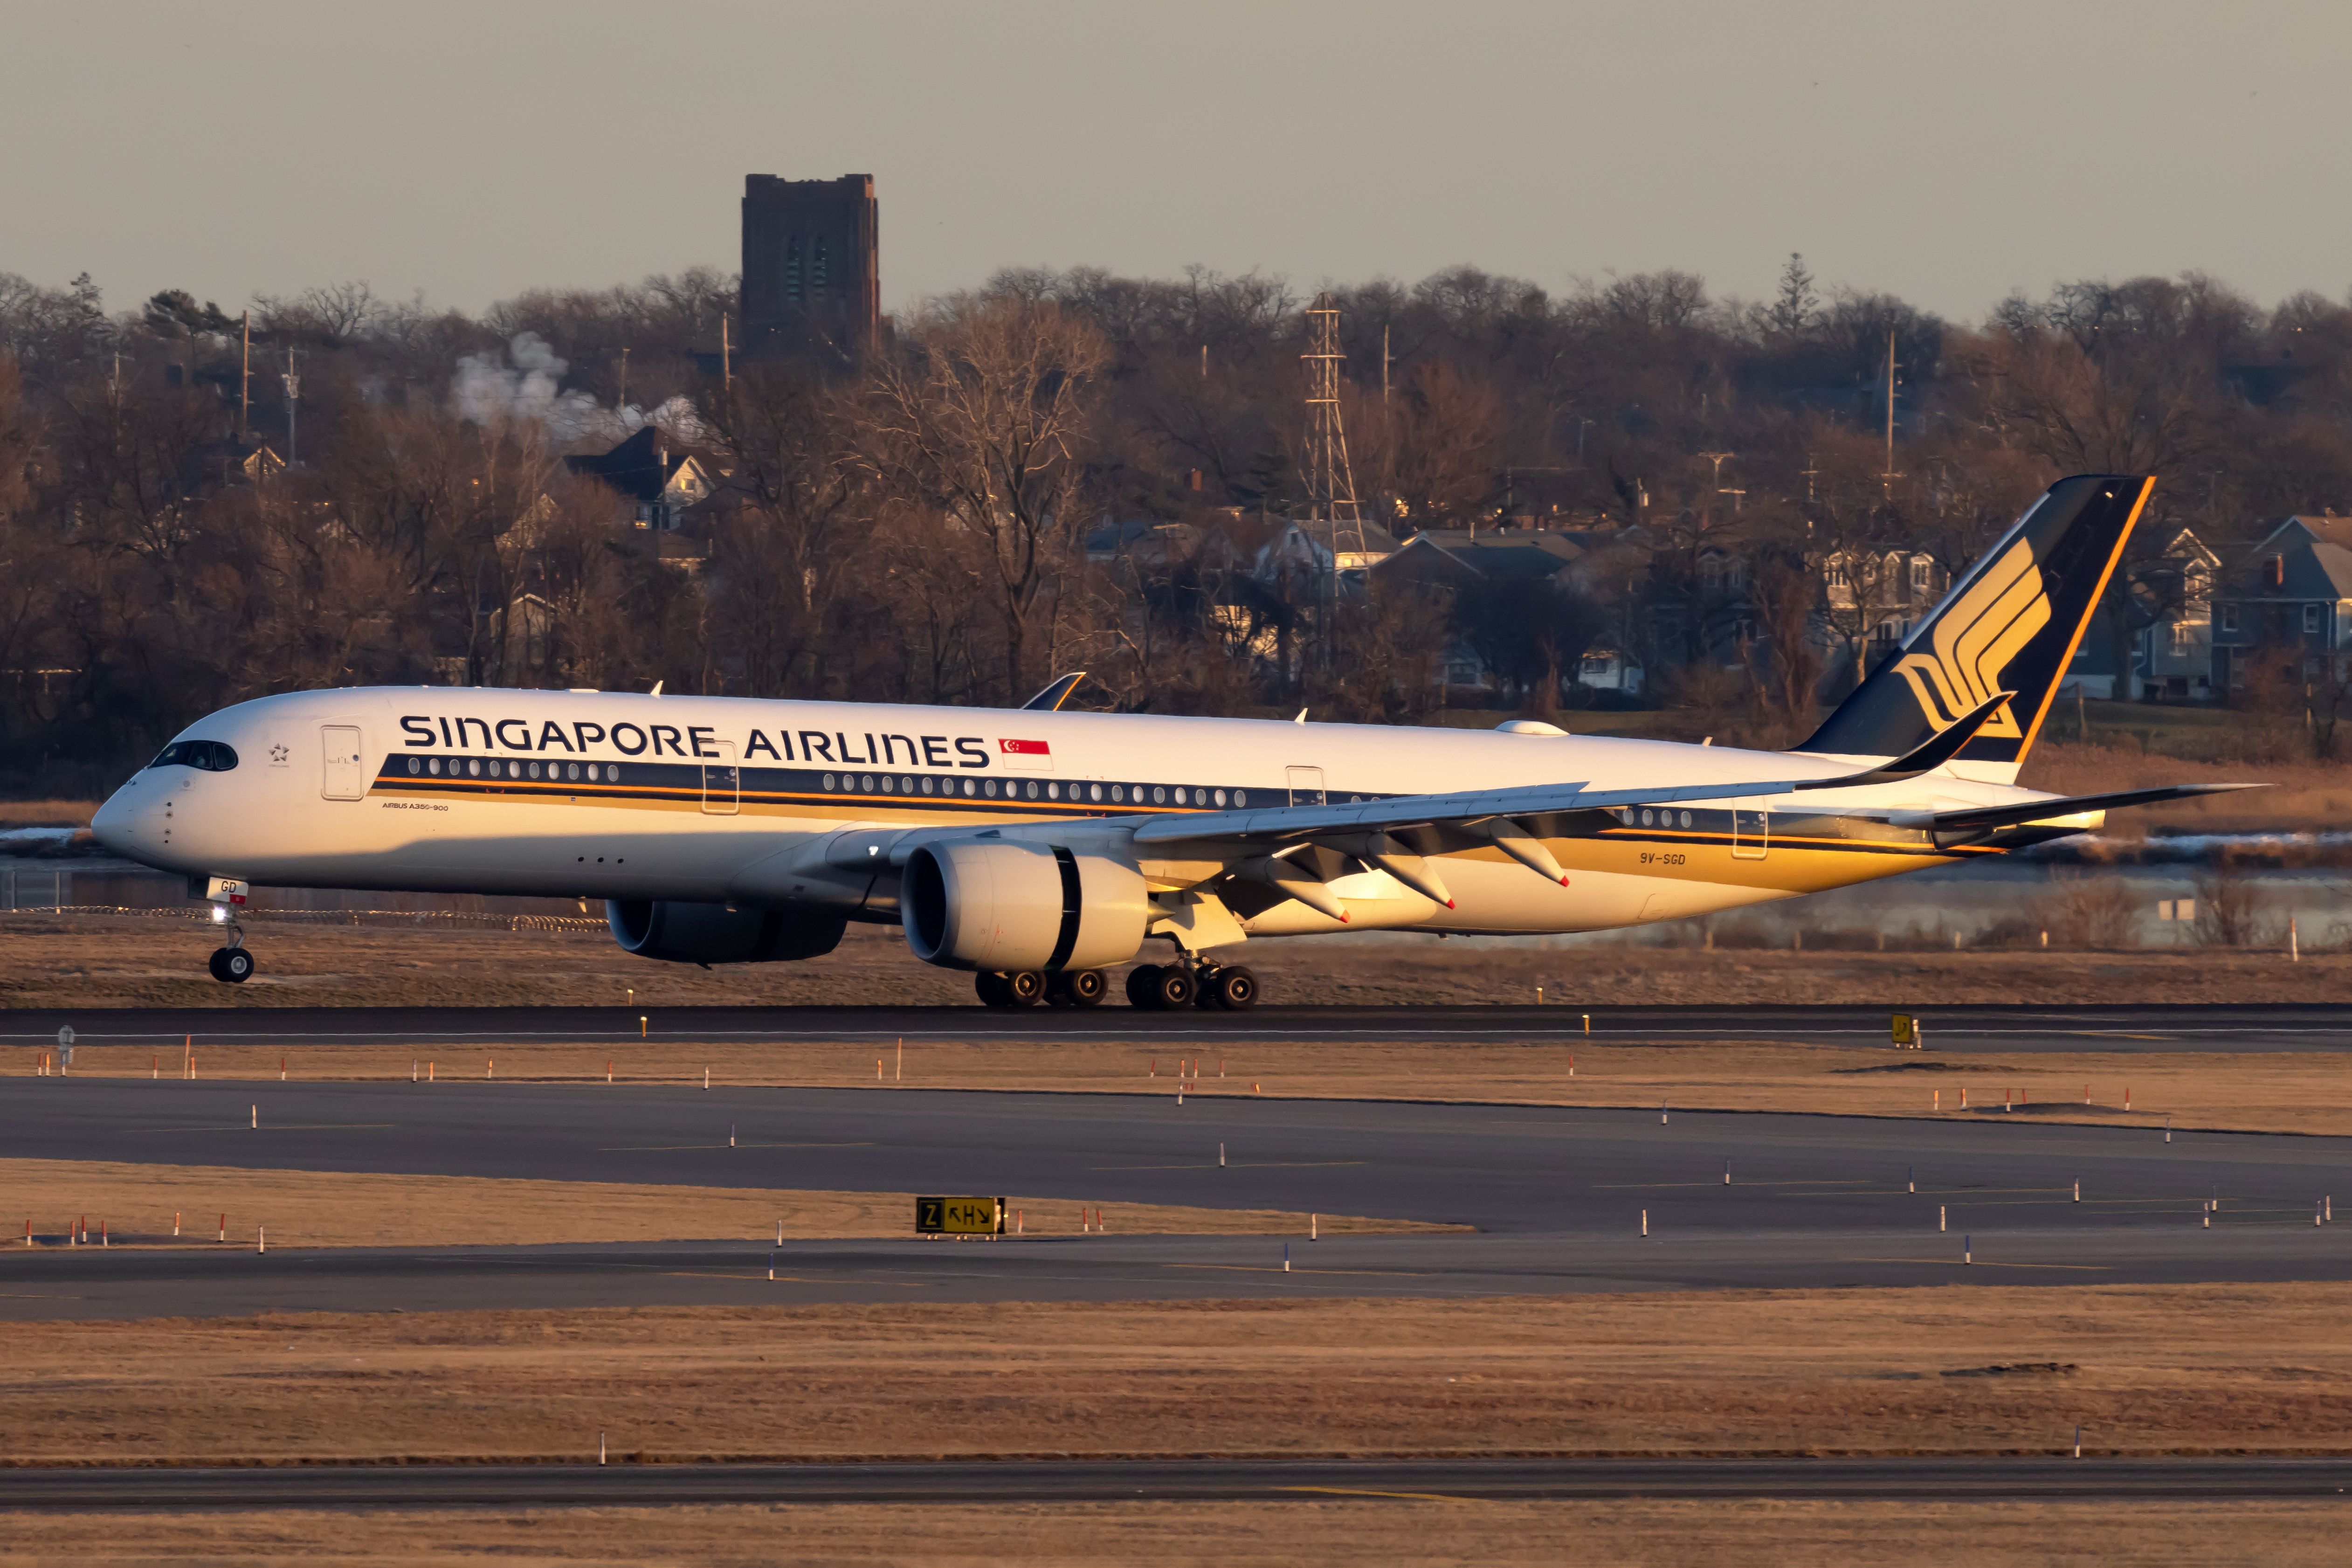 Singapore Airlines Airbus A350-941 at JFK